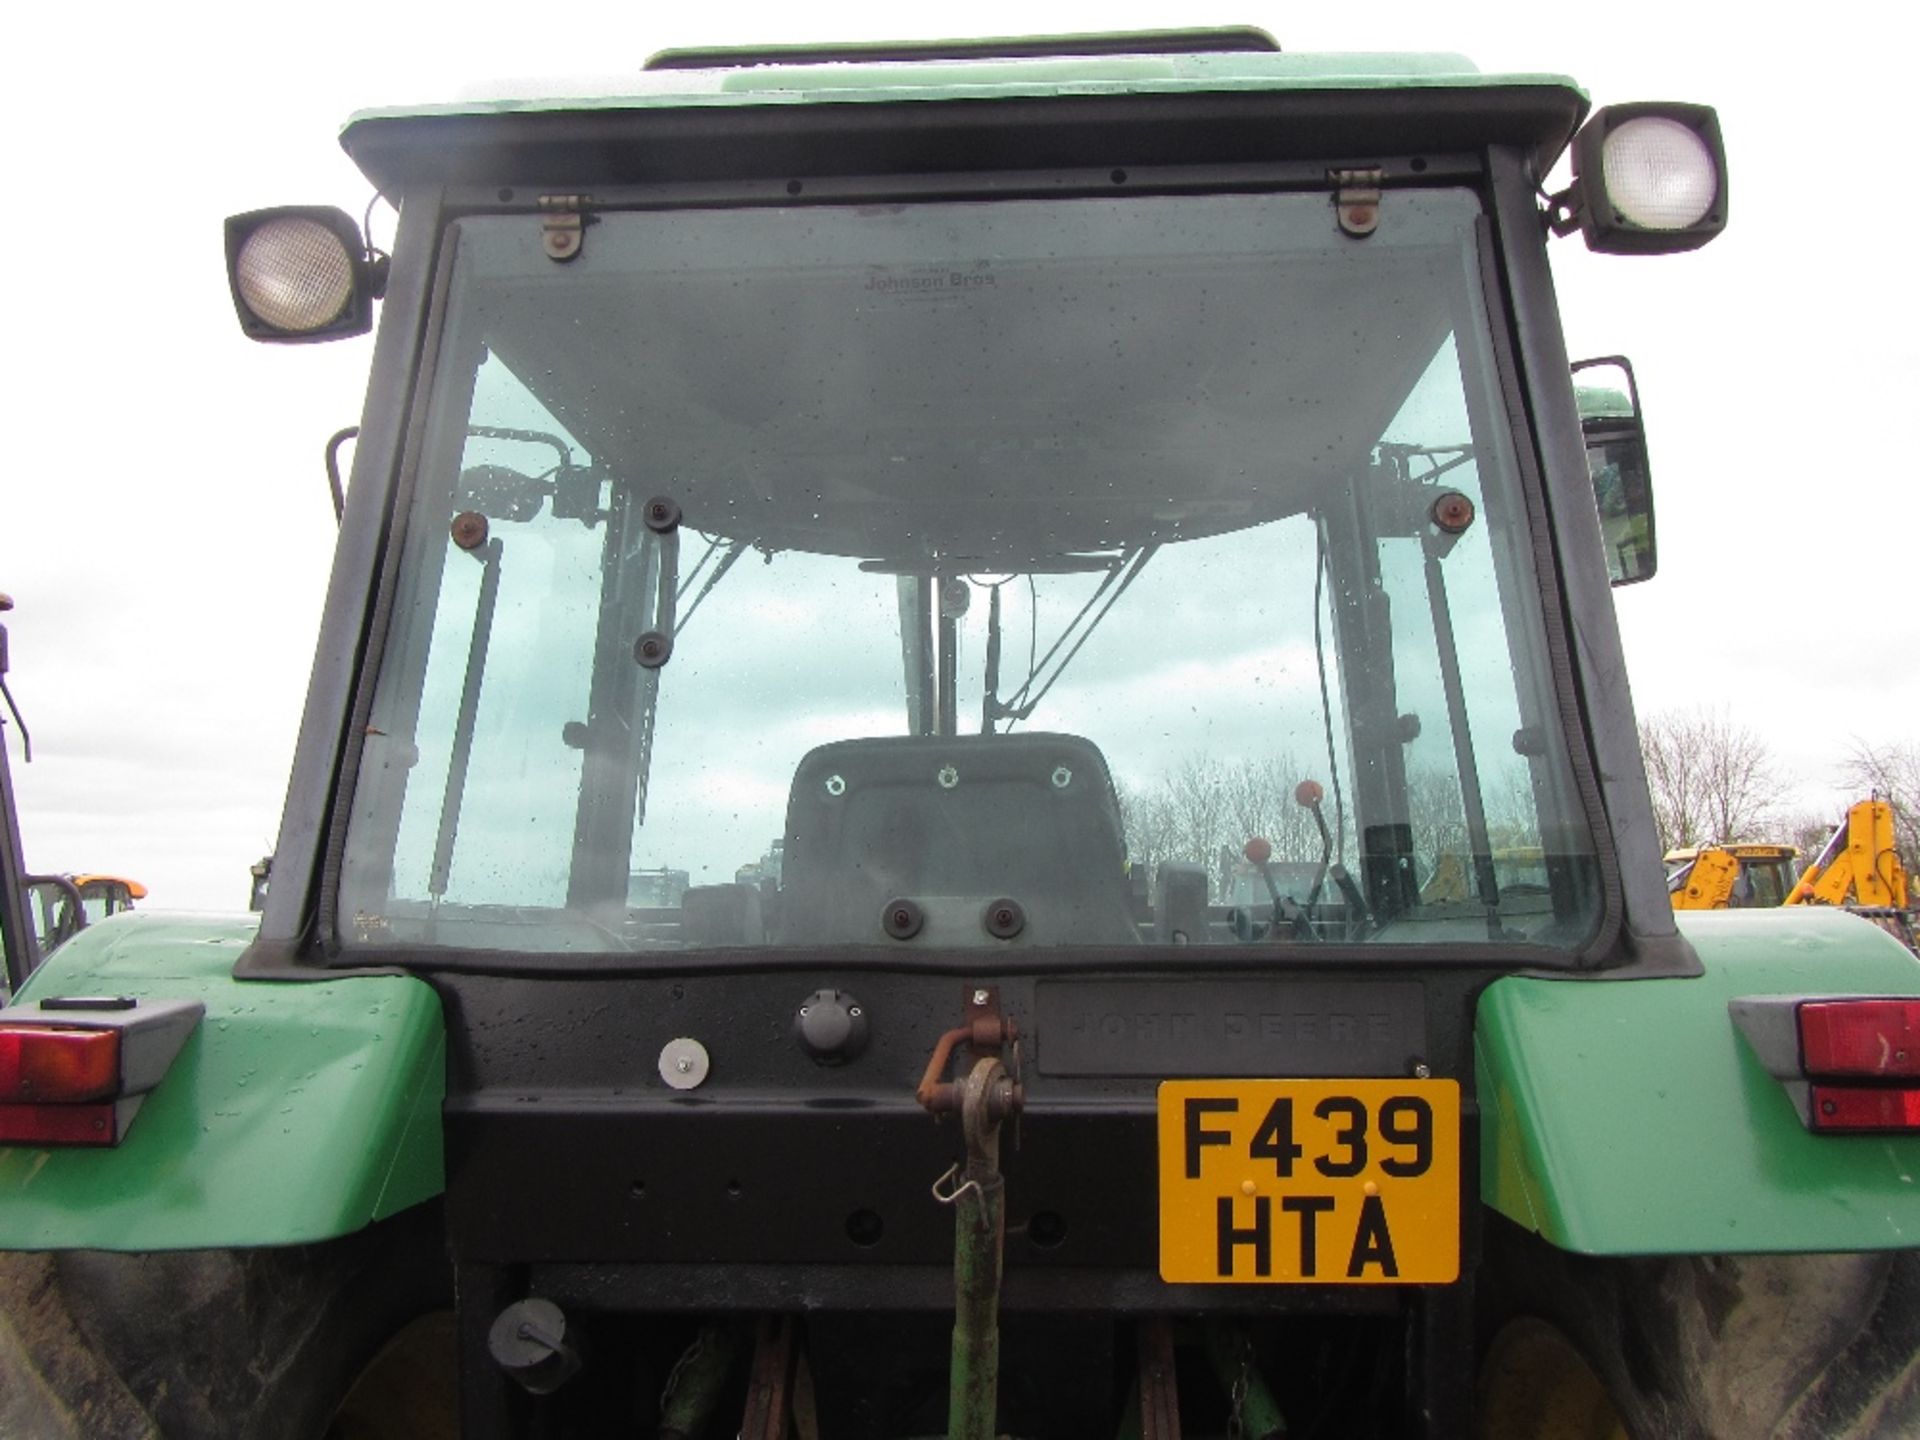 John Deere 3050 2wd Tractor One owner from new Reg. No. F439 HTA - Image 8 of 12